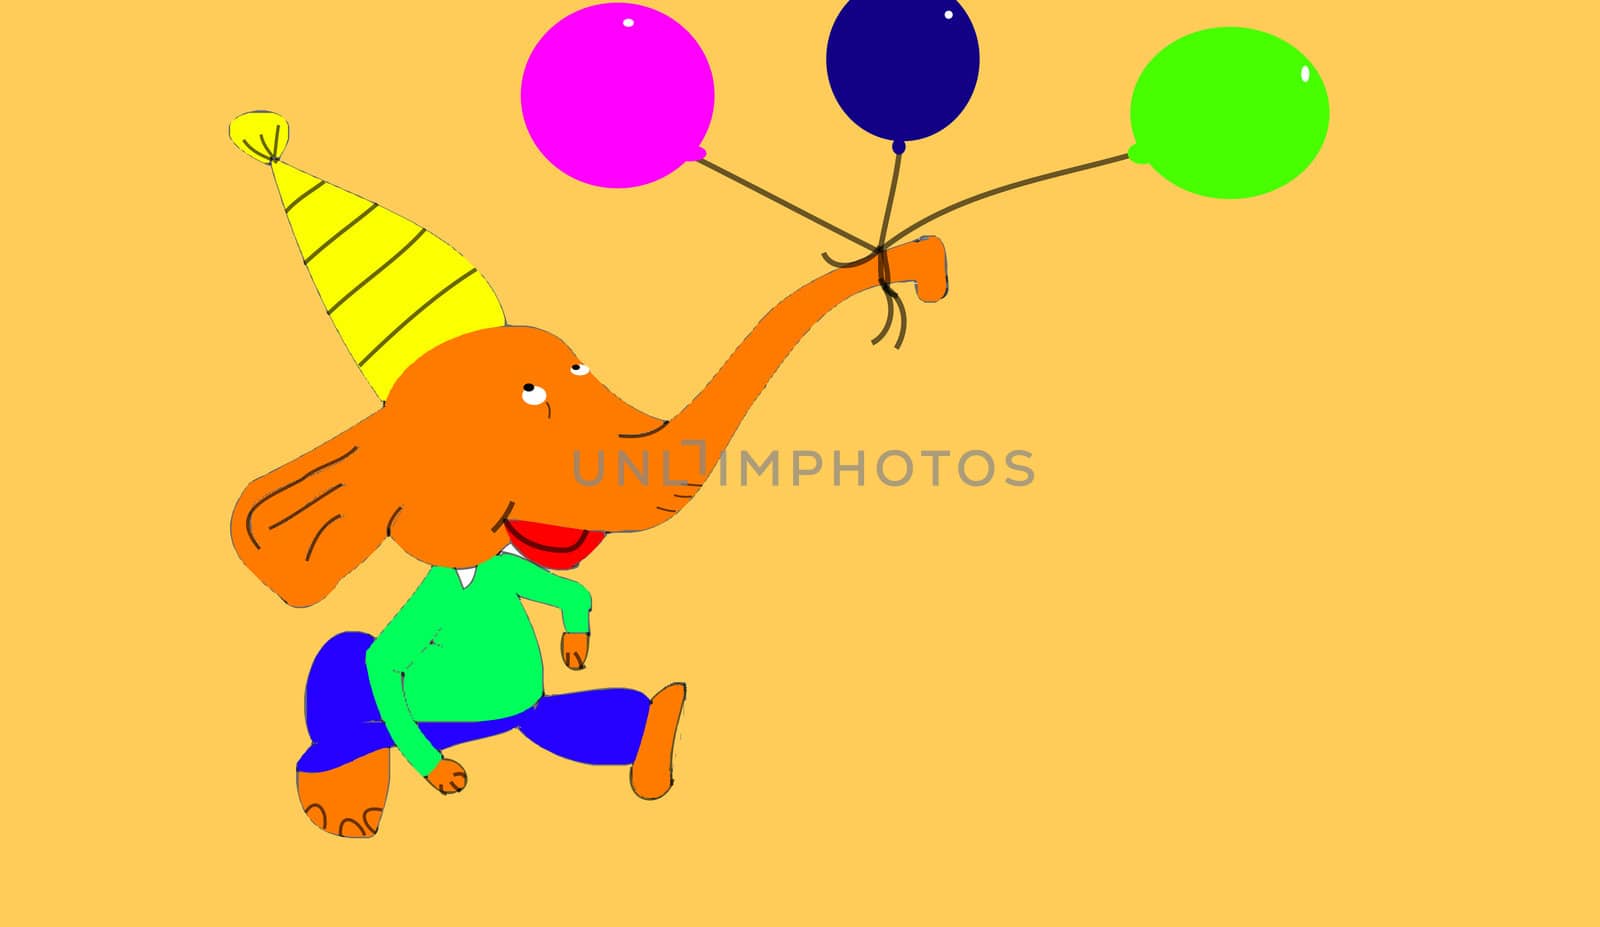 the elephant with balloons